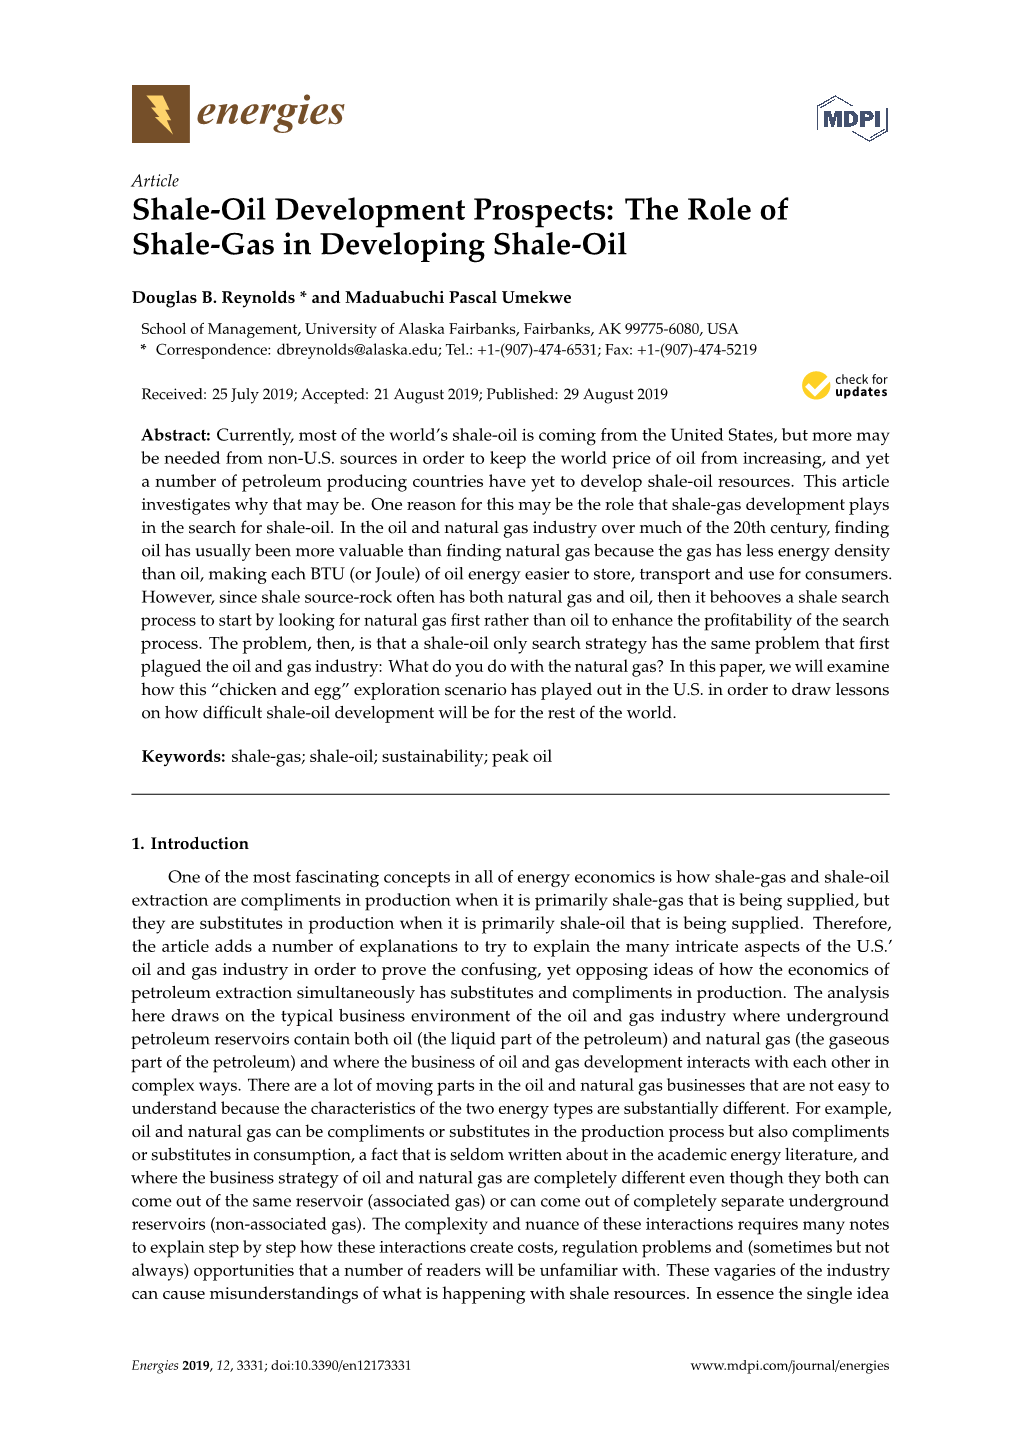 The Role of Shale-Gas in Developing Shale-Oil